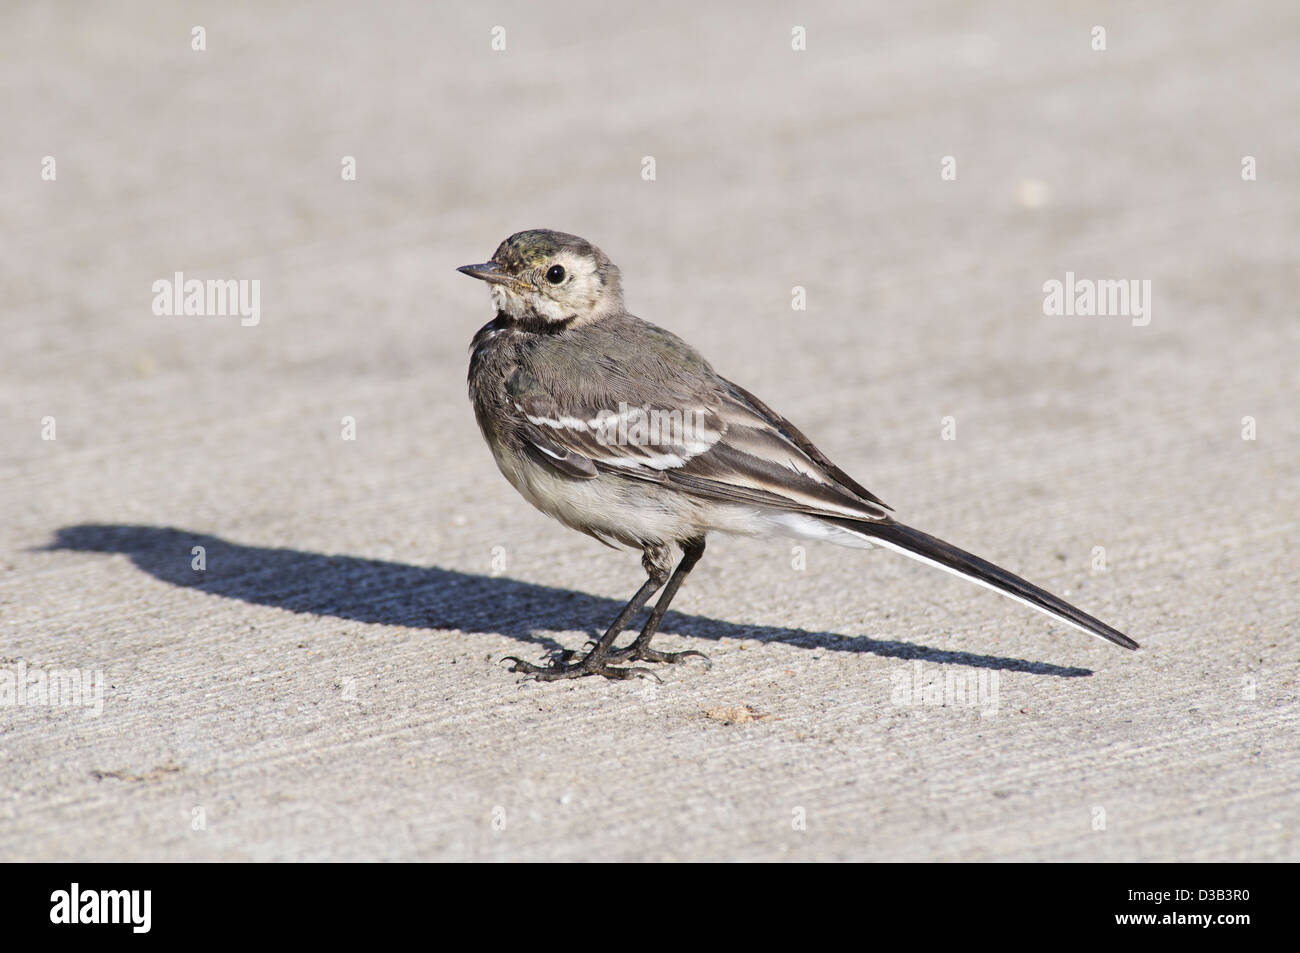 A juvenile pied wagtail (Motacilla alba) Standing on concrete with bright sunshine casting a strong shadow. Rainham, Essex. Stock Photo